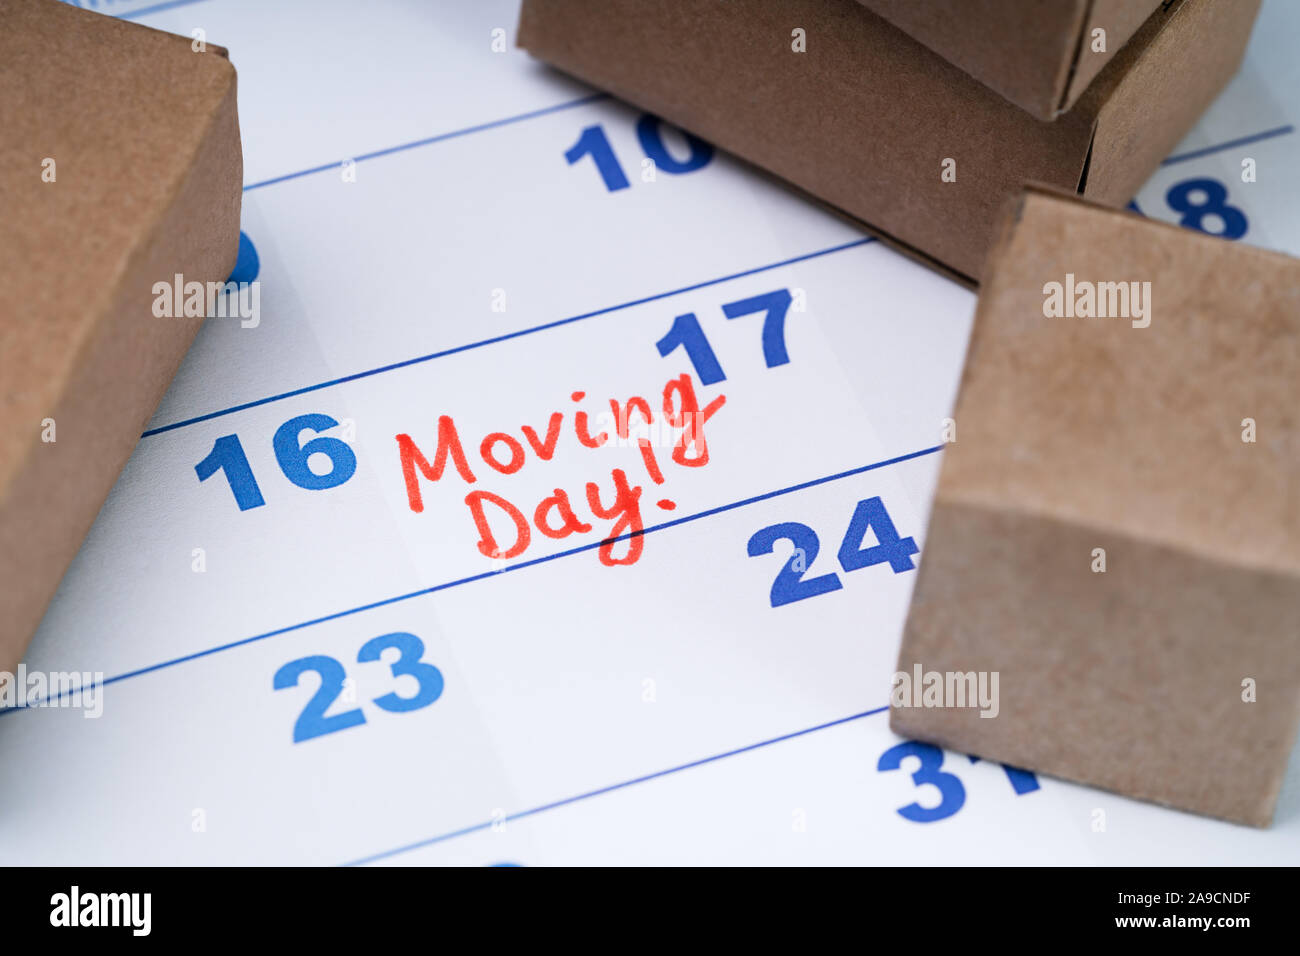 Elevated View Of Moving Day Text On Calendar With Small Cardboard Boxes Stock Photo